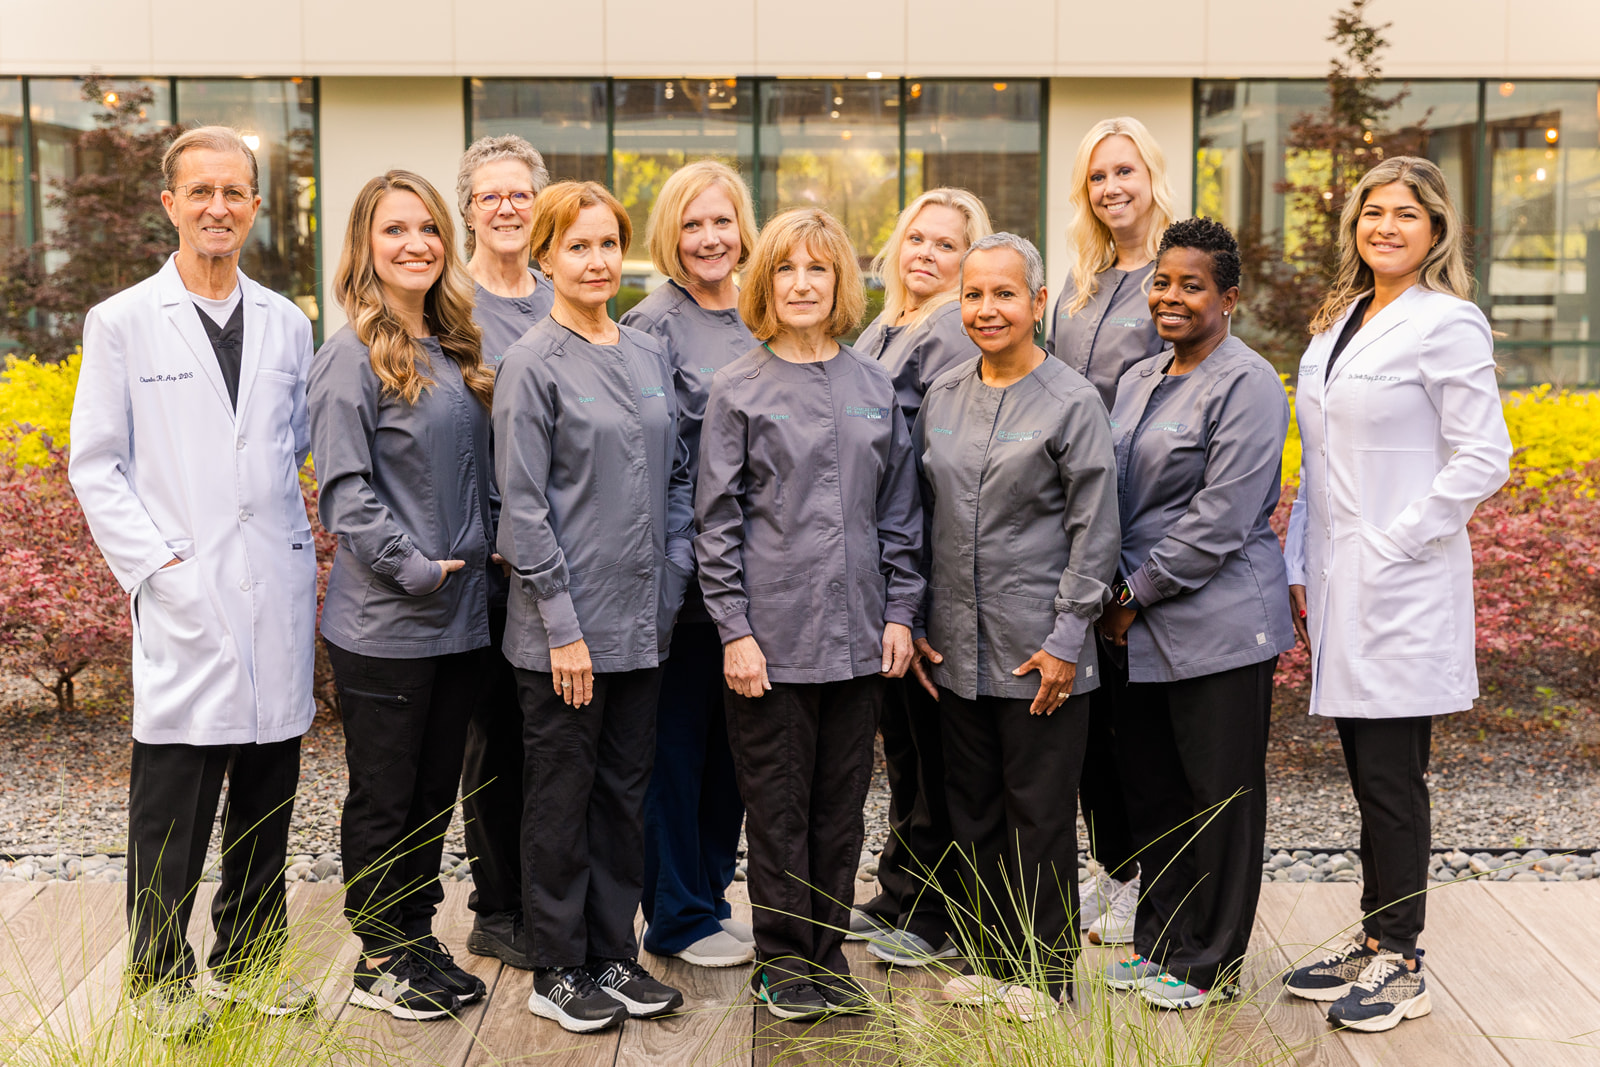 Dentists, hygiene team and office team professional picture Charles Arp, DDS & Associates by Atlanta brand photographer Laure Photography